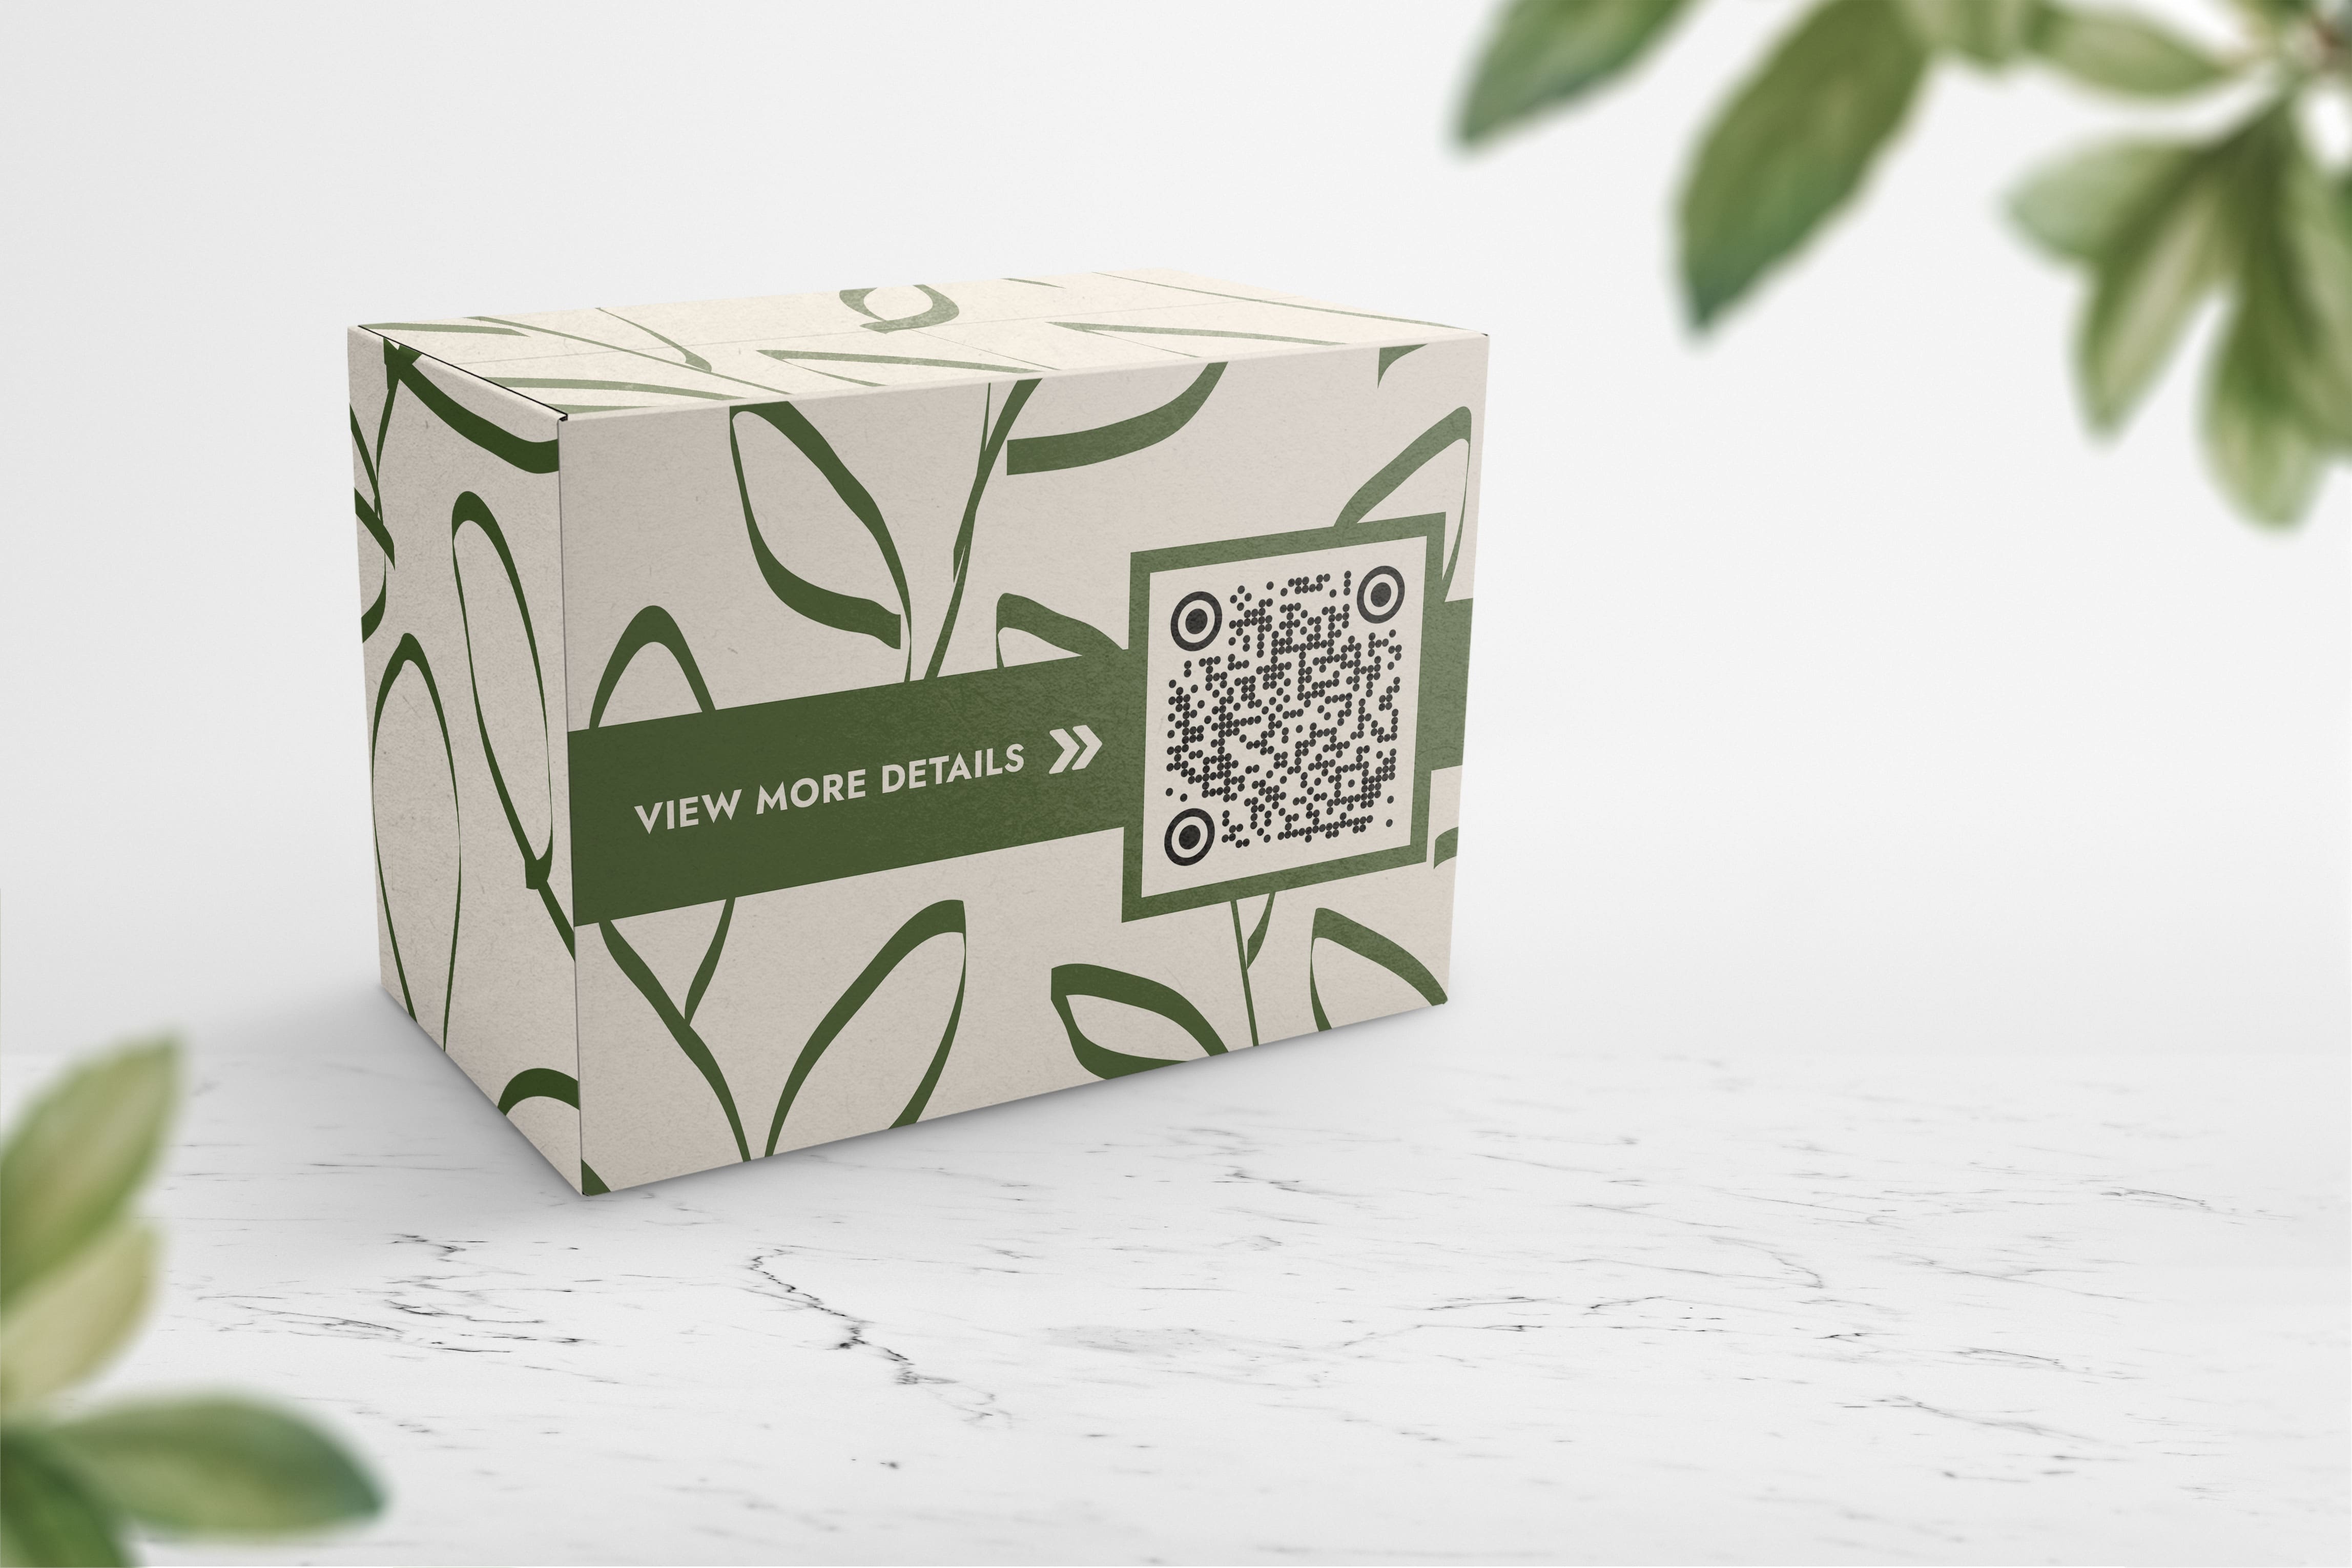 The Future of Product Packaging: Integrated QR Codes